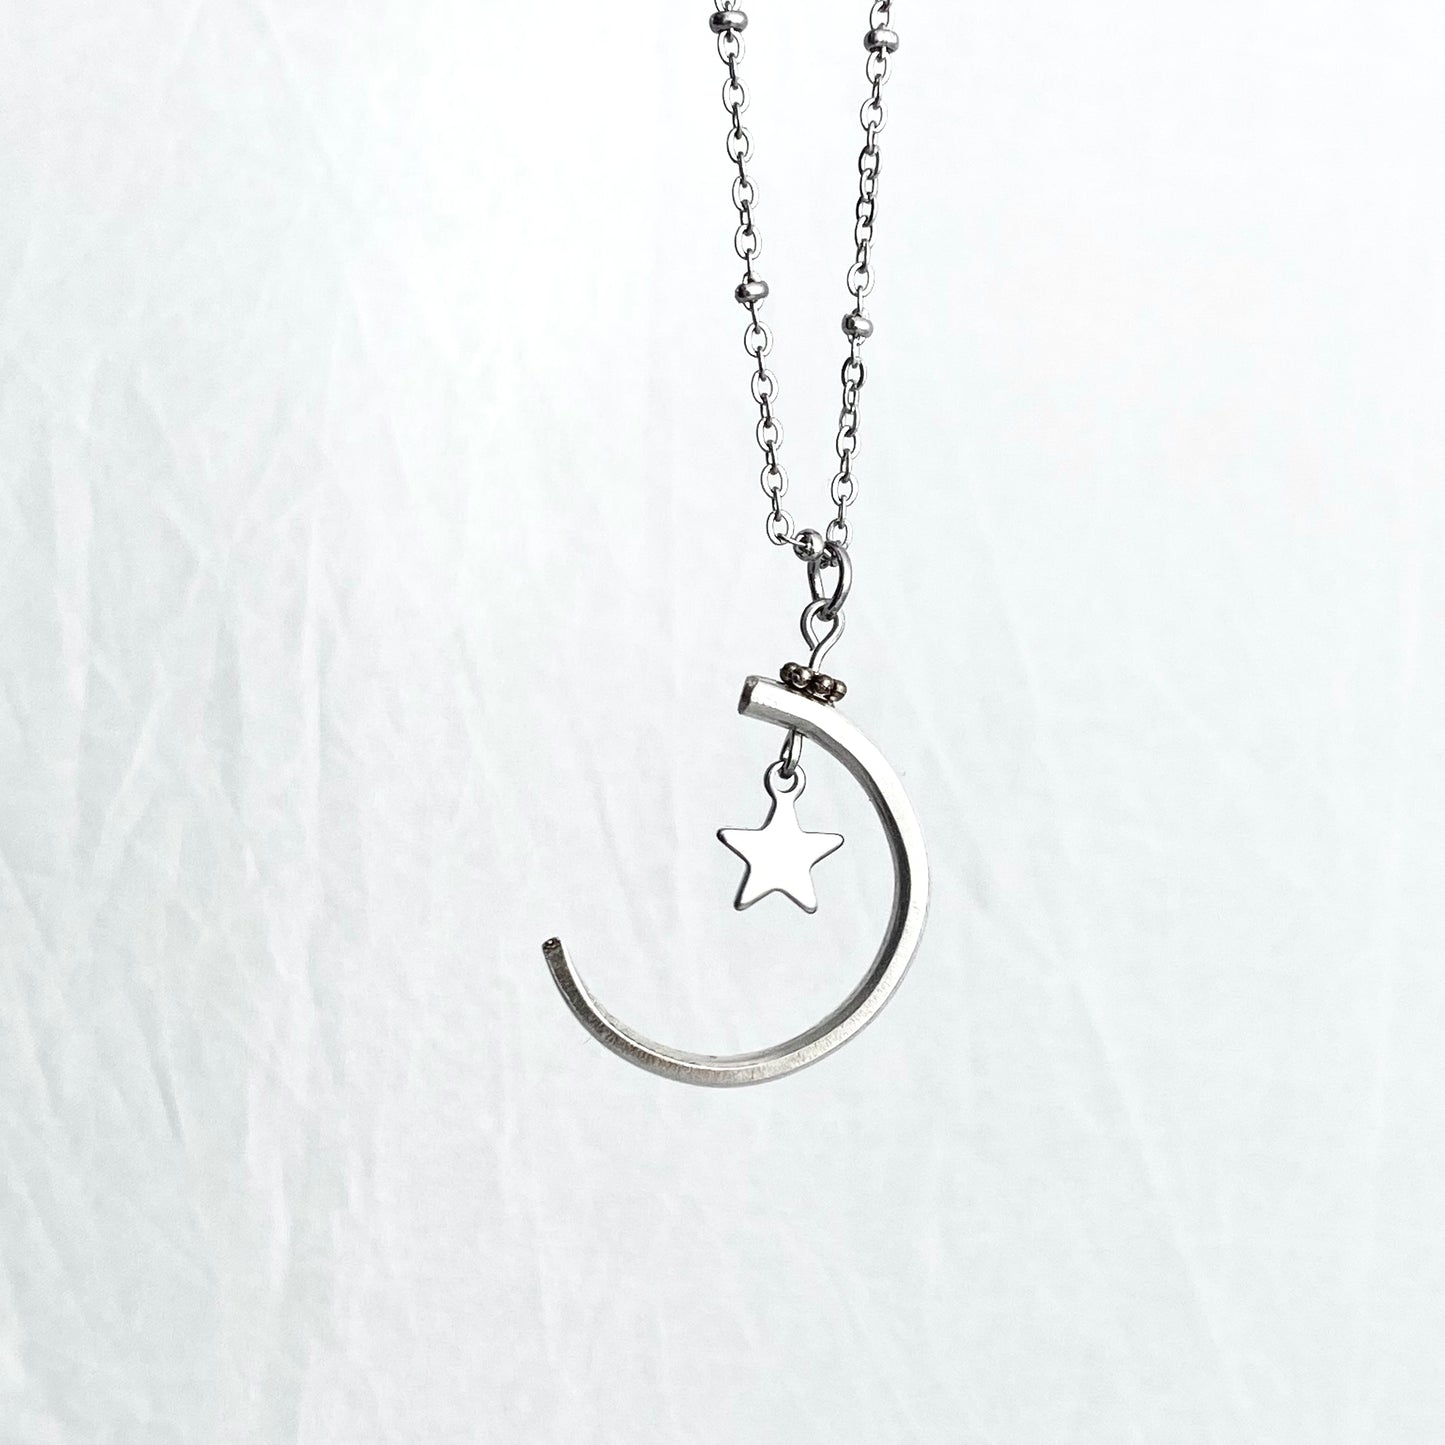 Crescent Moon Fork Tine Necklace, Moon Phase Jewelry, Vintage Silverware Jewelry Necklaces callistafaye   